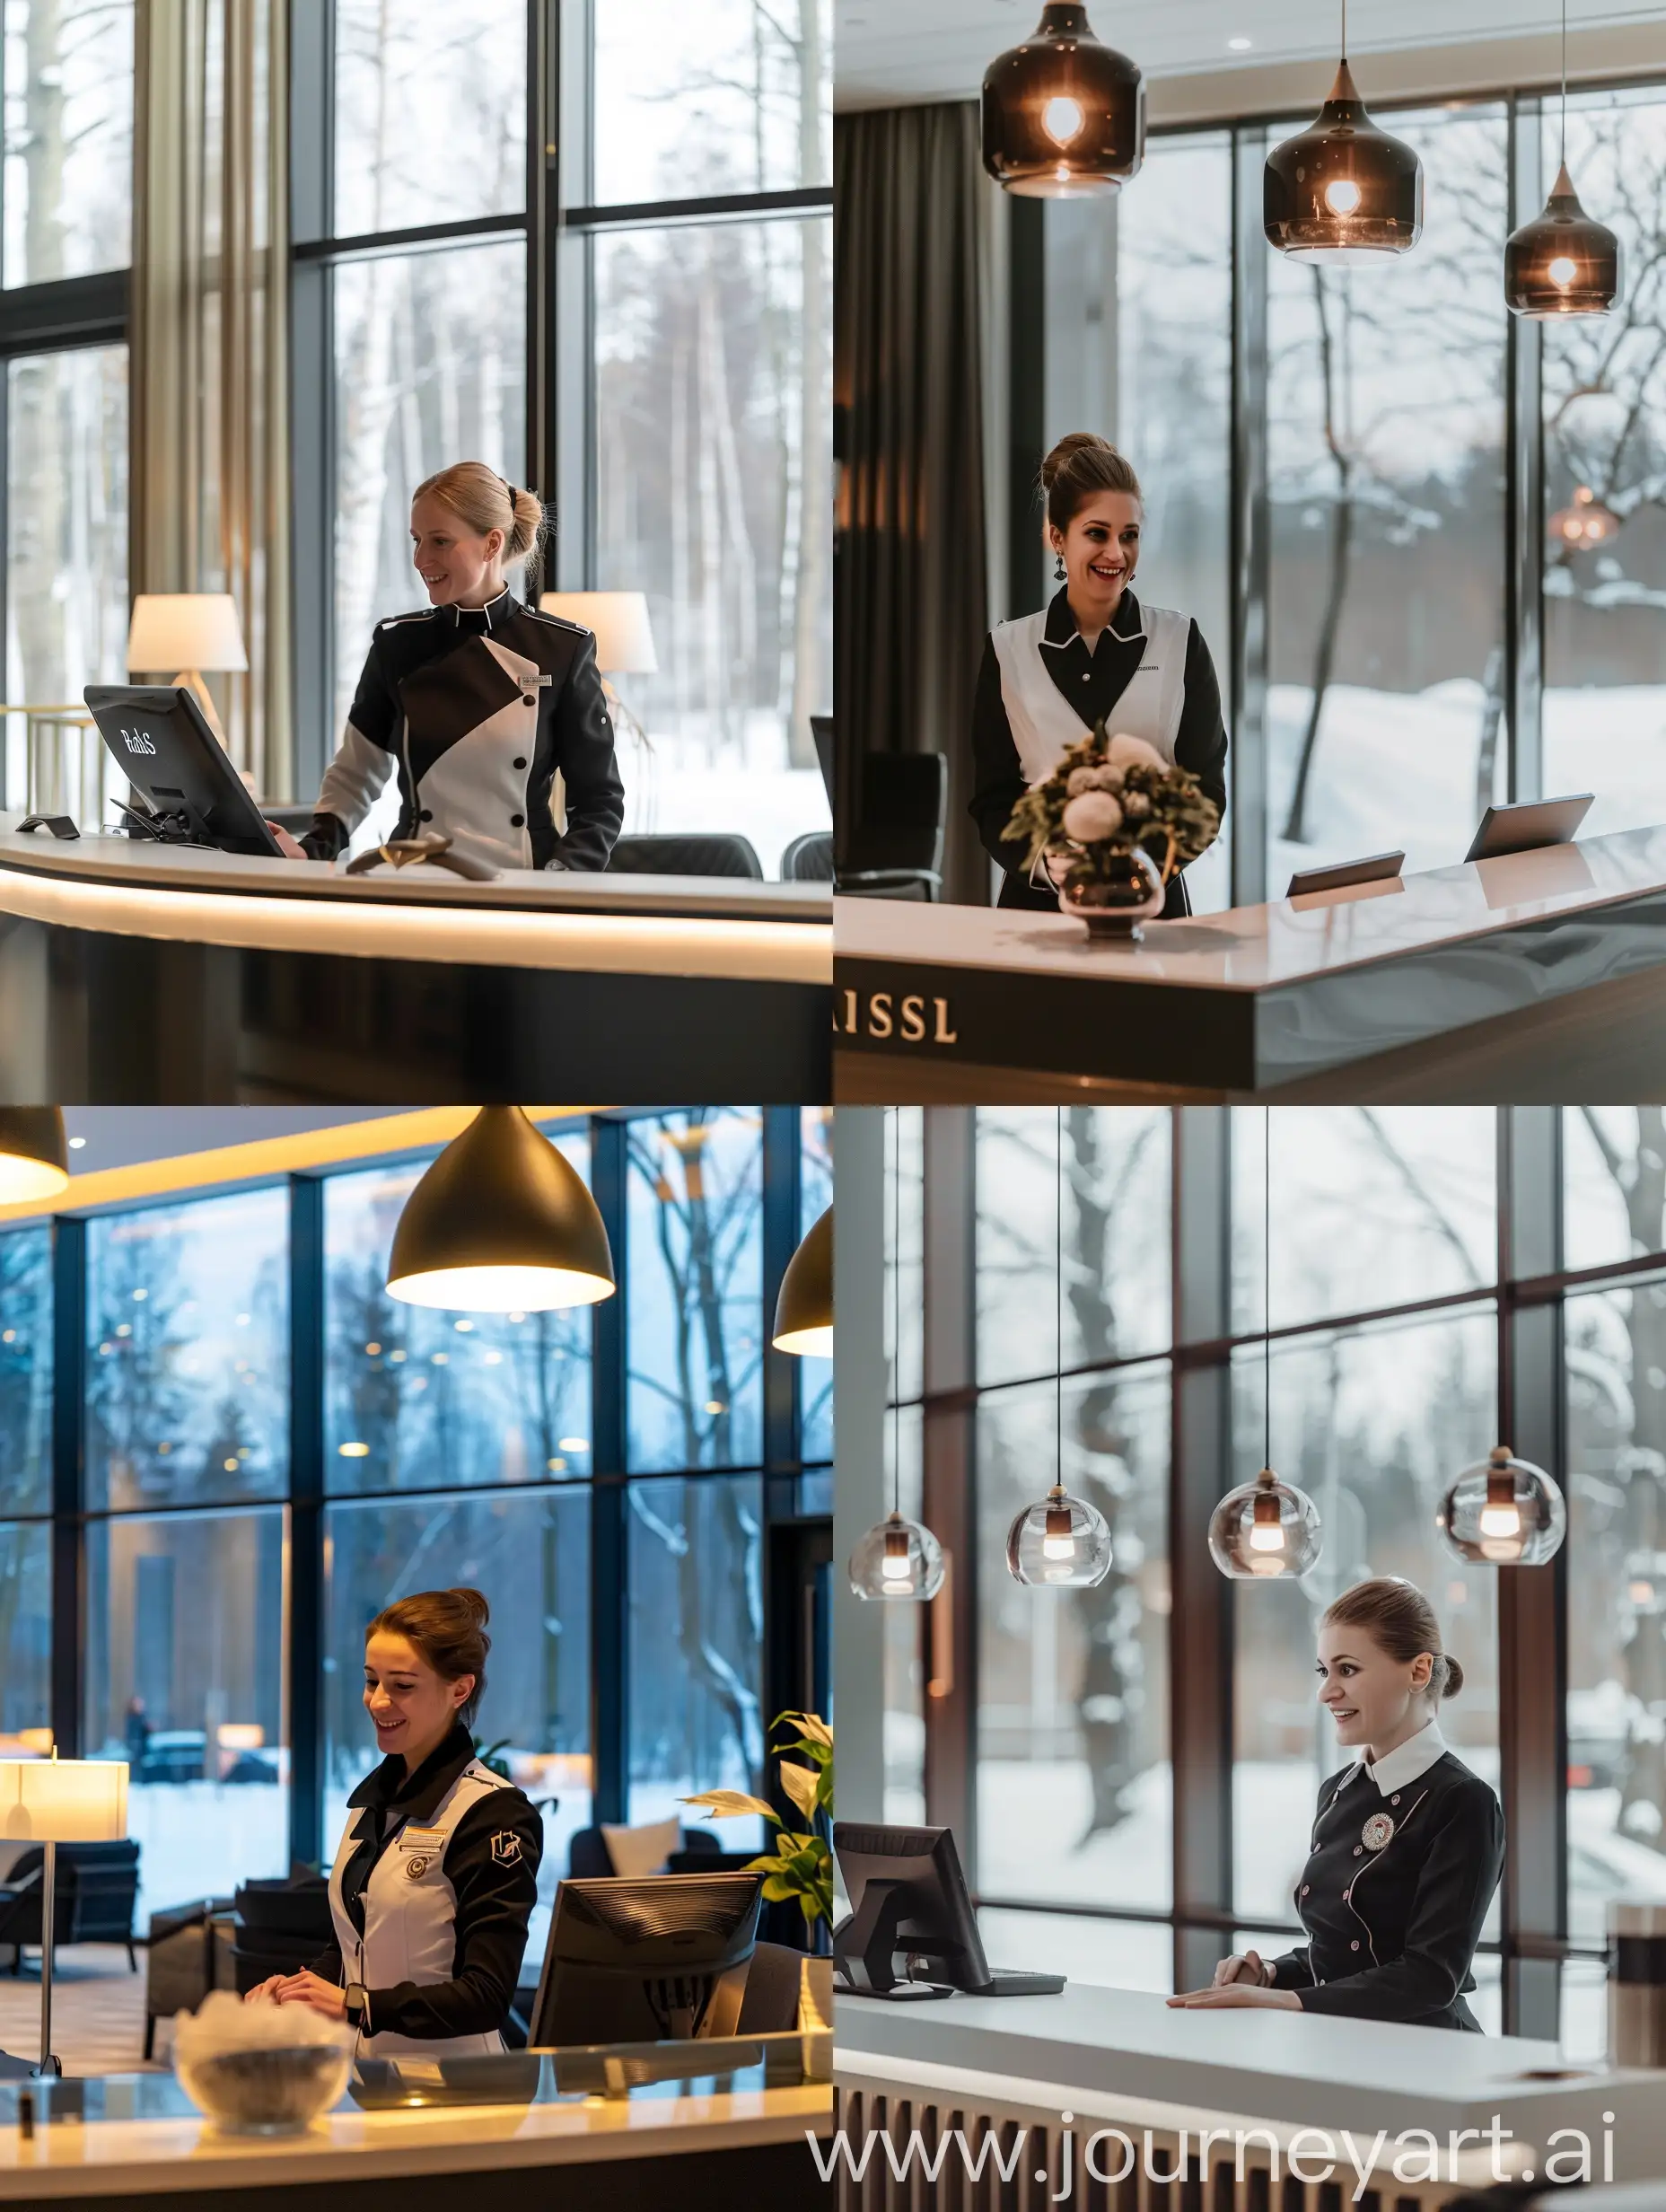 Radisson resort Hotel scandic style interior, reception desk, focus to the reception administrator, black and white uniform, she is welcoming the guest, smiling, big windows, winter outside